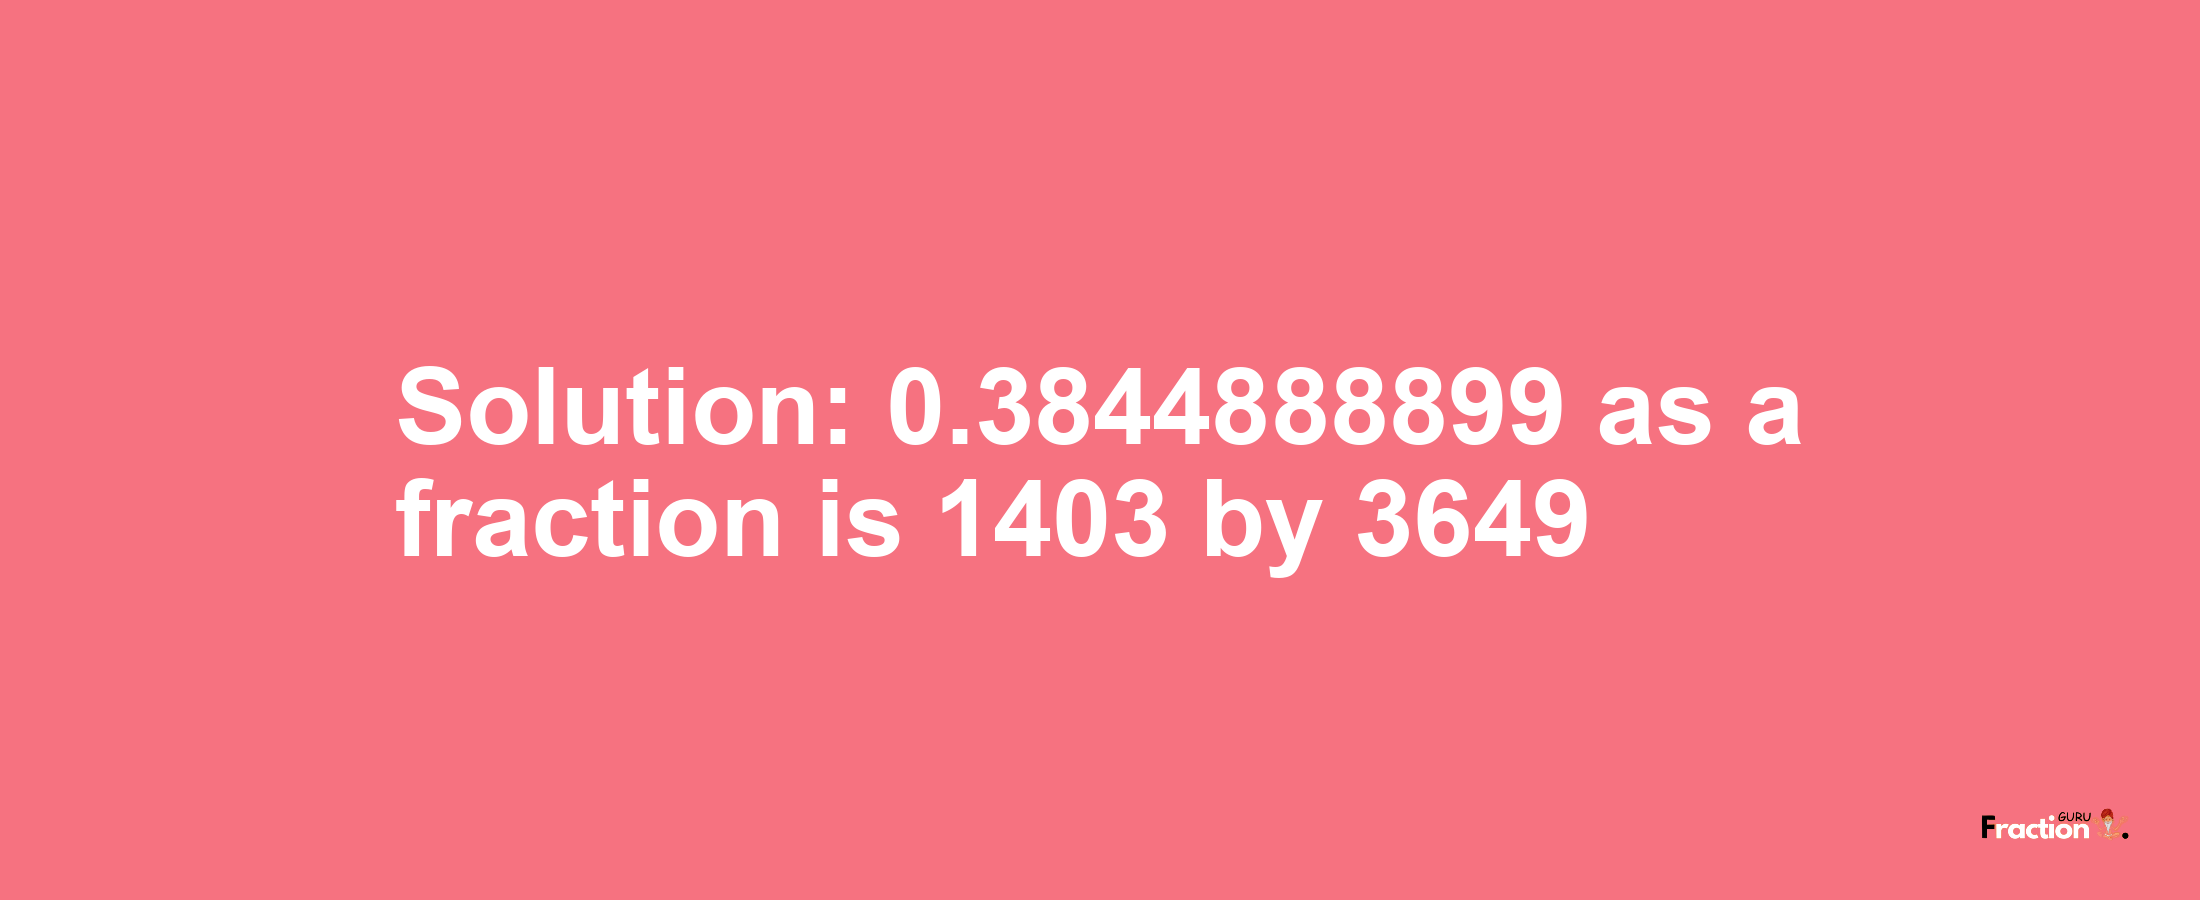 Solution:0.3844888899 as a fraction is 1403/3649